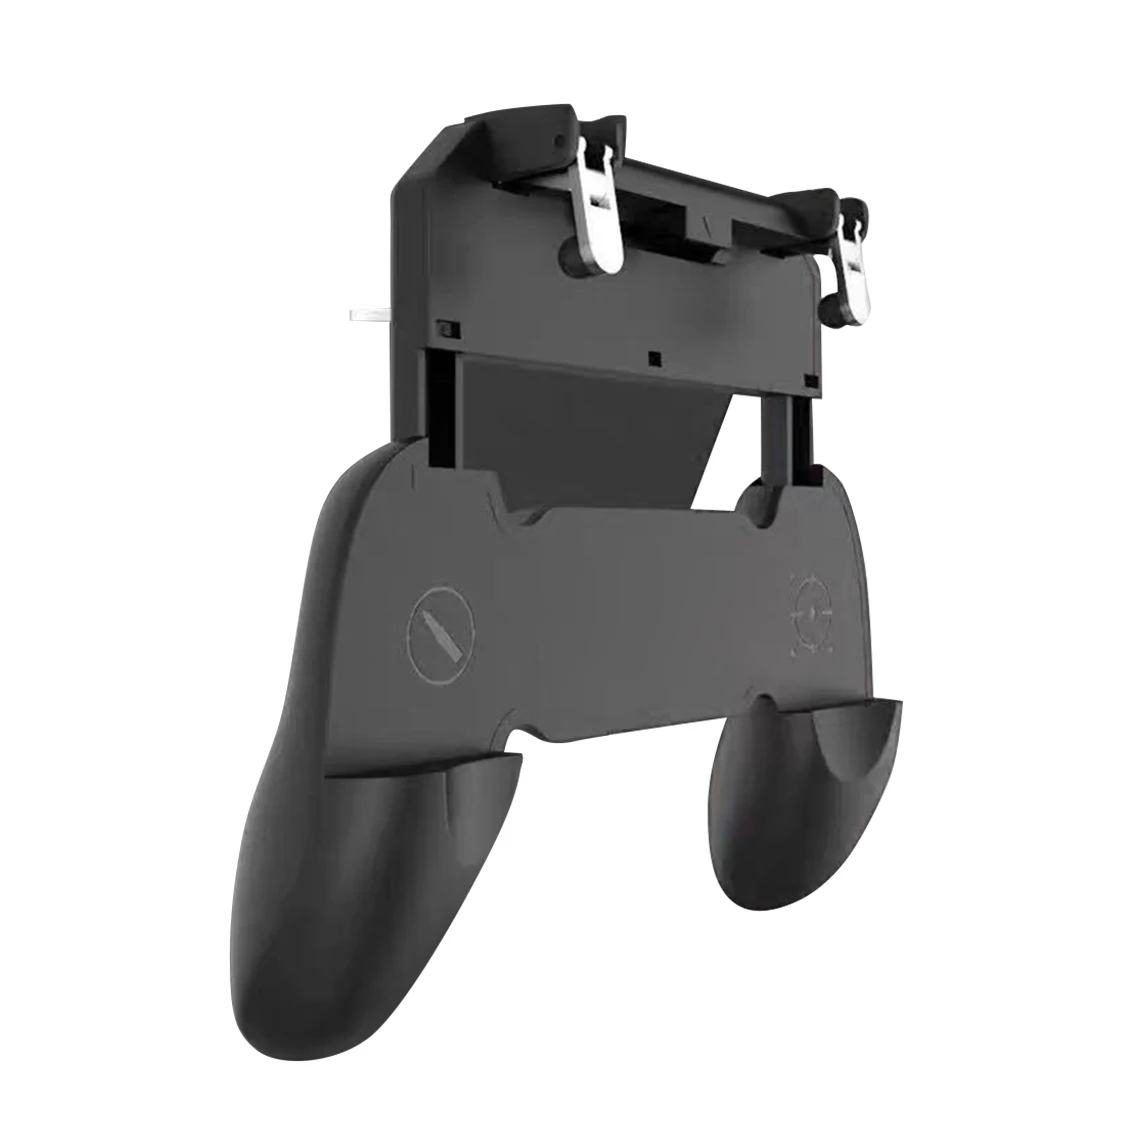 

W10 For Pubg Controller For Mobile Phone L1R1 Game Shooter Trigger Fire Button For IPhone Android SmartPhone Gamepad Joystick, 1 colors